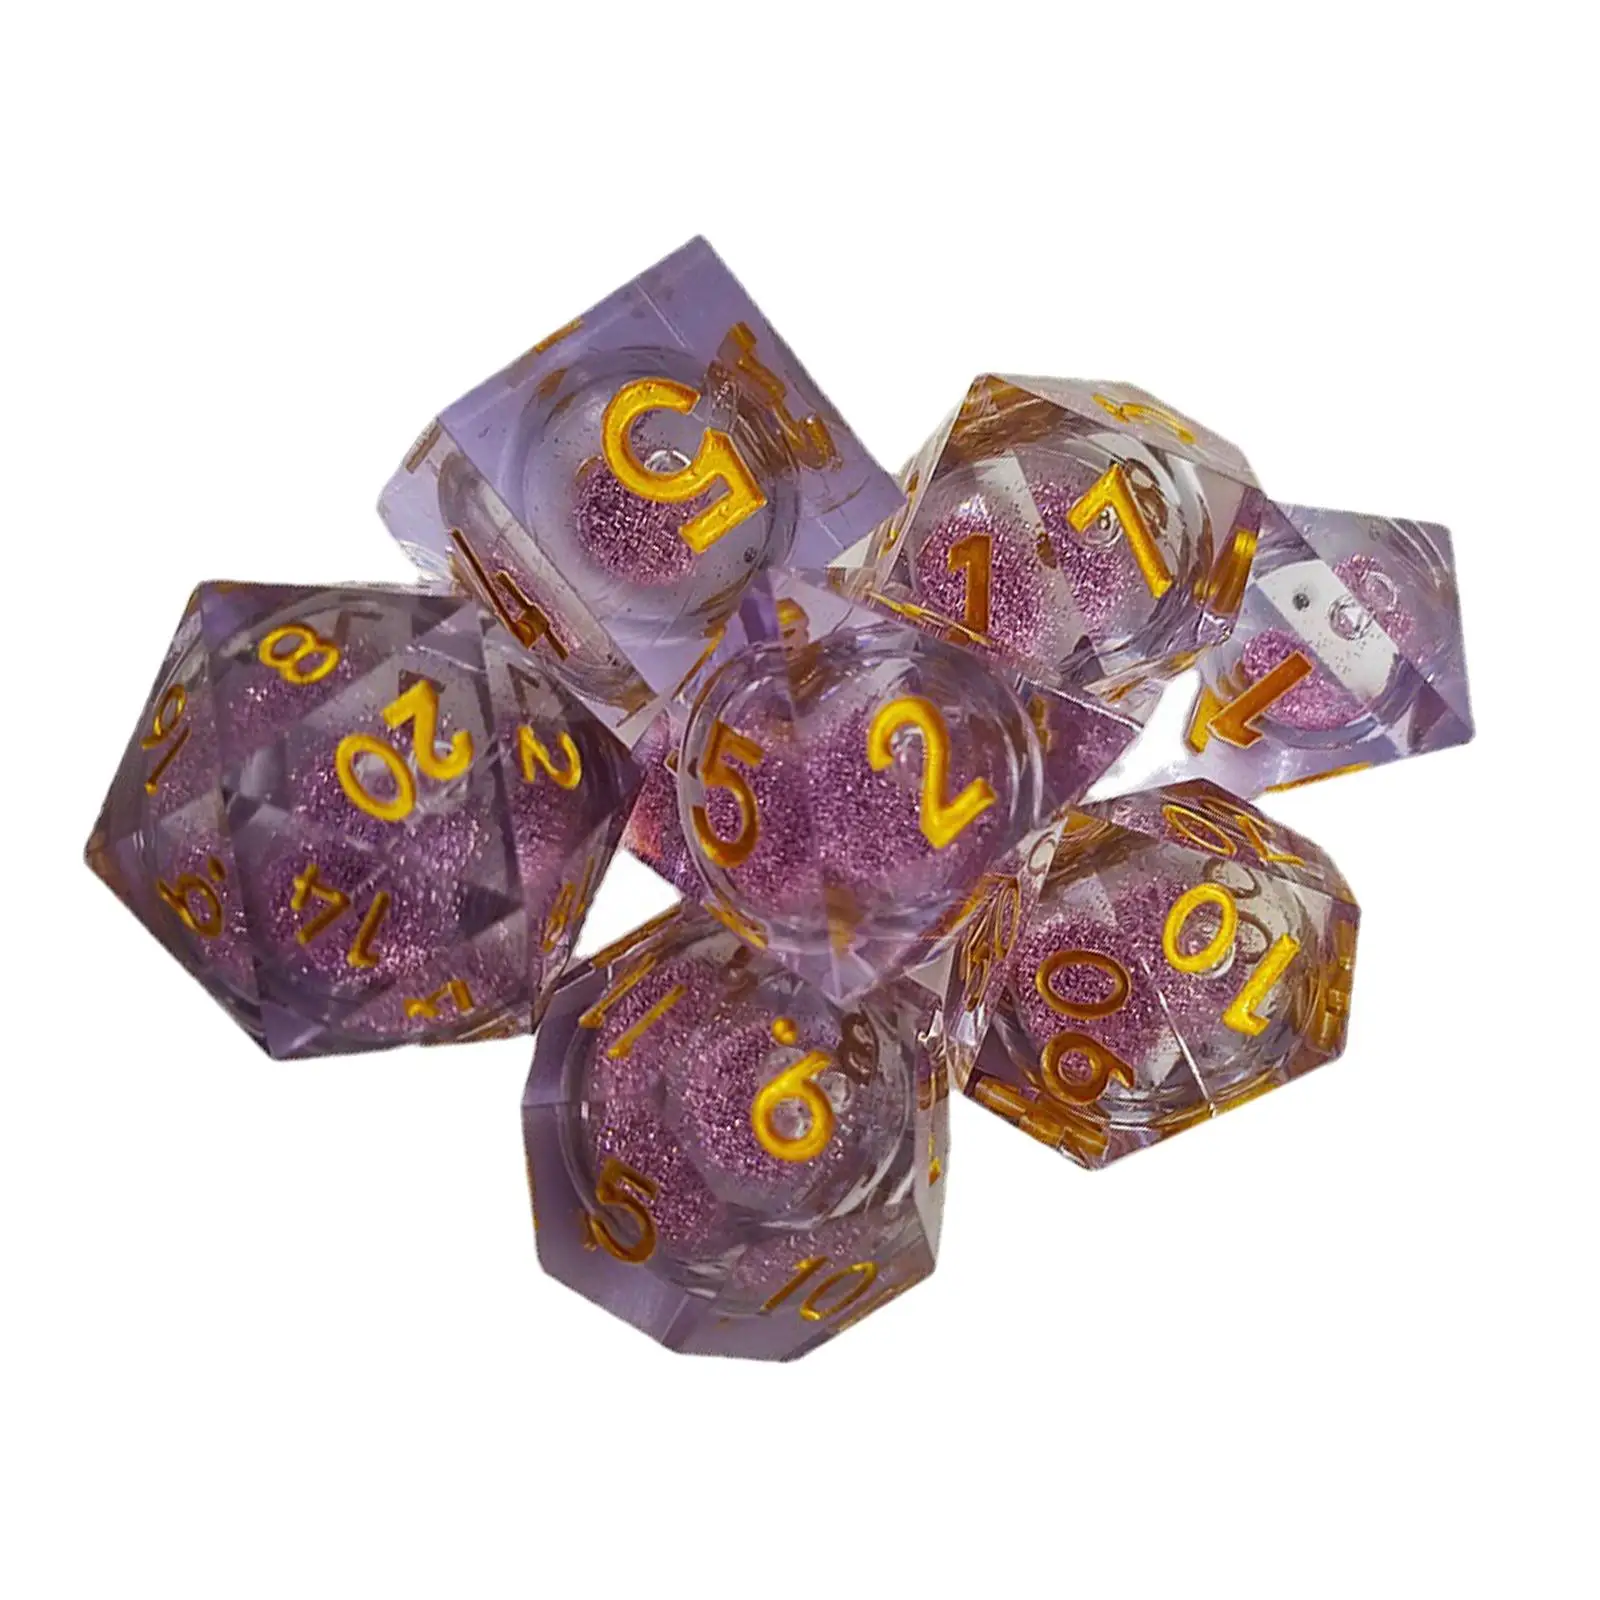 7pcs Translucent Multi Sided Dice Play Gaming Dice Digital Dices Set for Table Game Teaching Prop Entertainment Role Playing